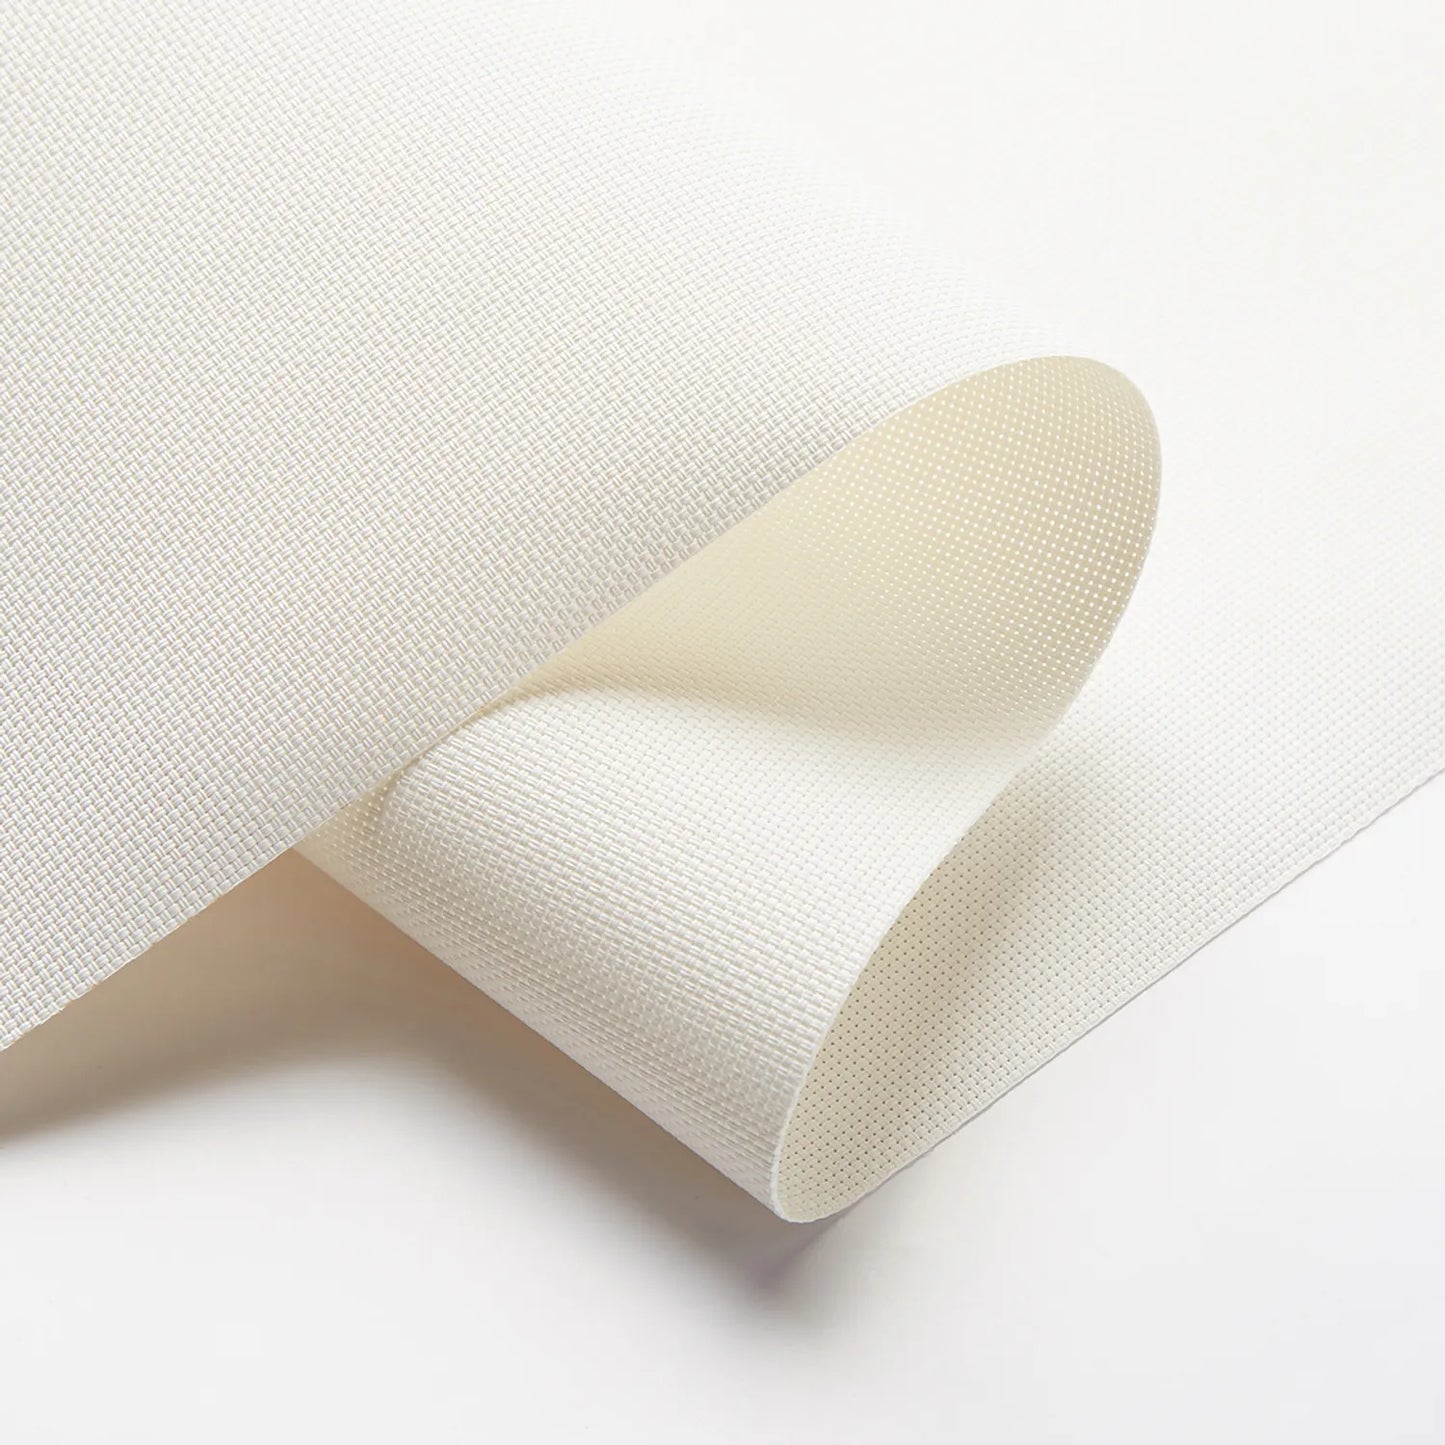 Close-up of white textured solar shade fabric demonstrating UV protection and light filtering capabilities